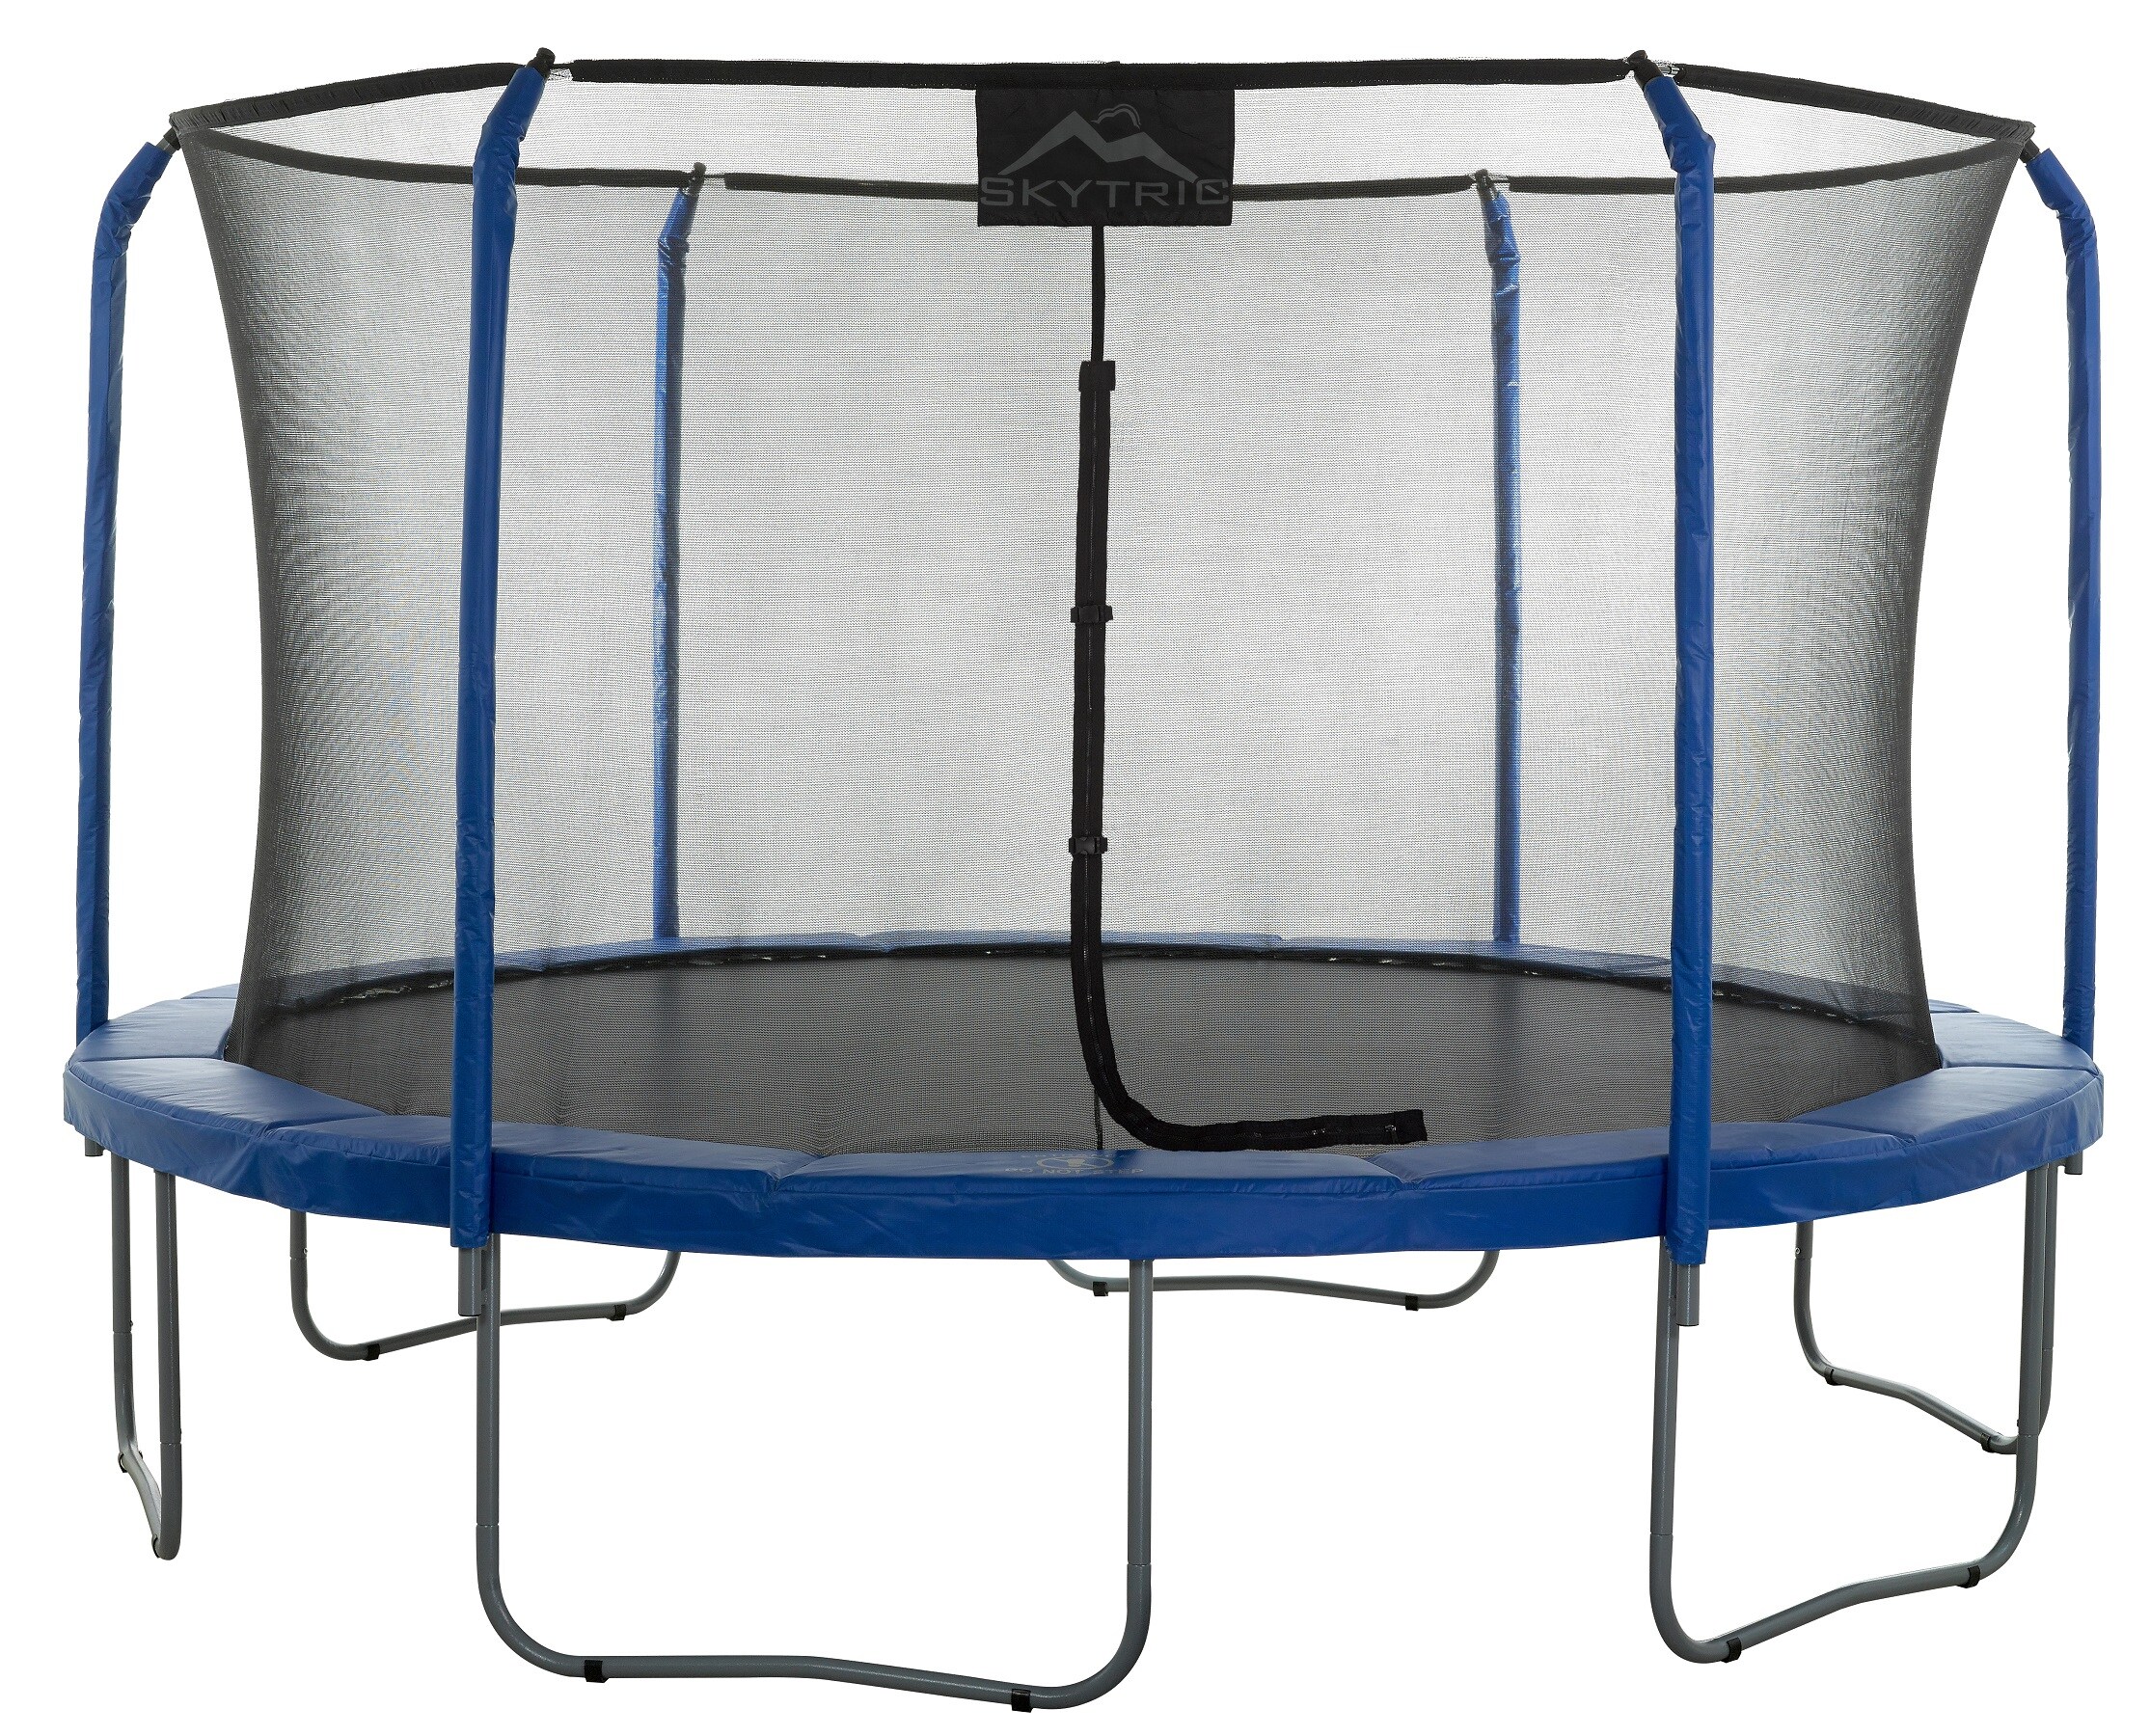 Upper Bounce 13' Trampoline Enclosure Safety Net Fits for 13' Round Frames NEW 